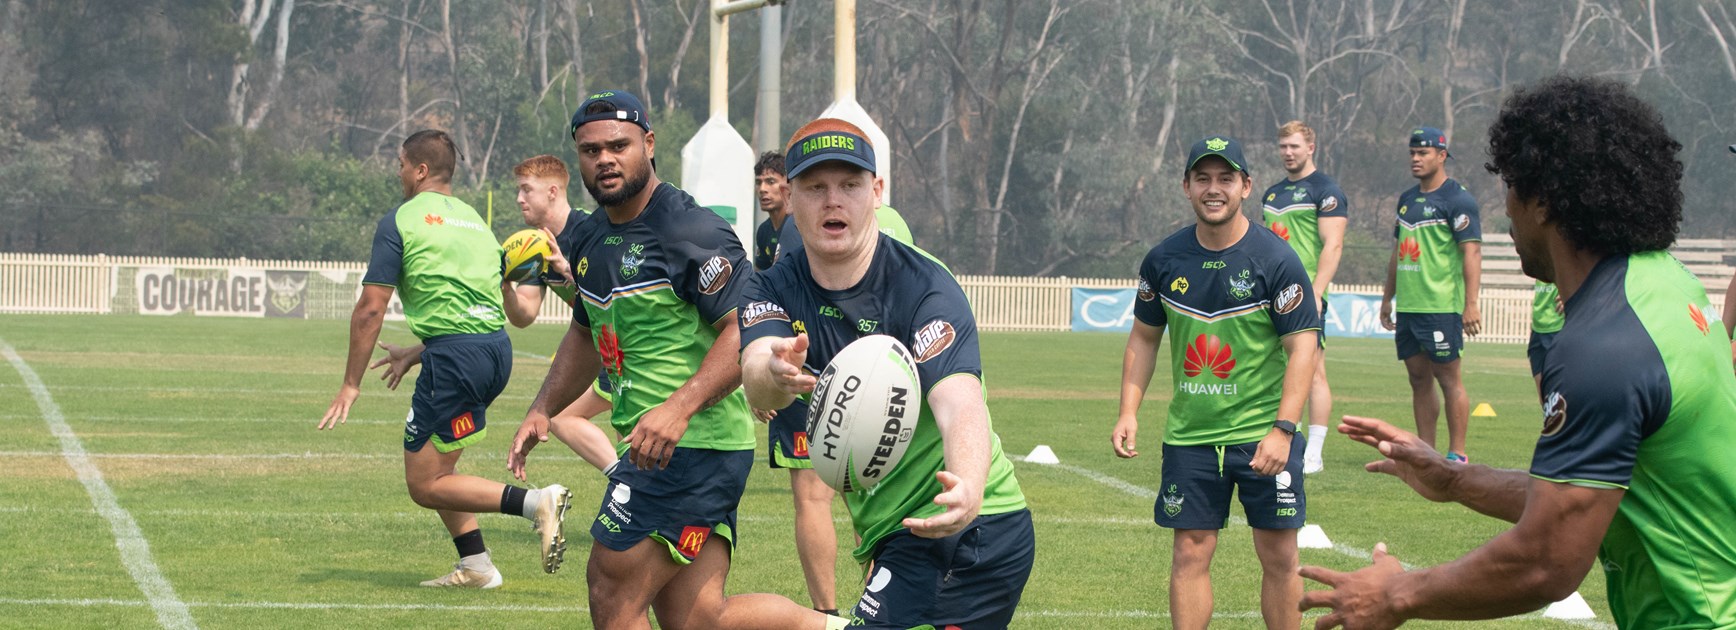 Raiders Open training Session to support Bushfire relief